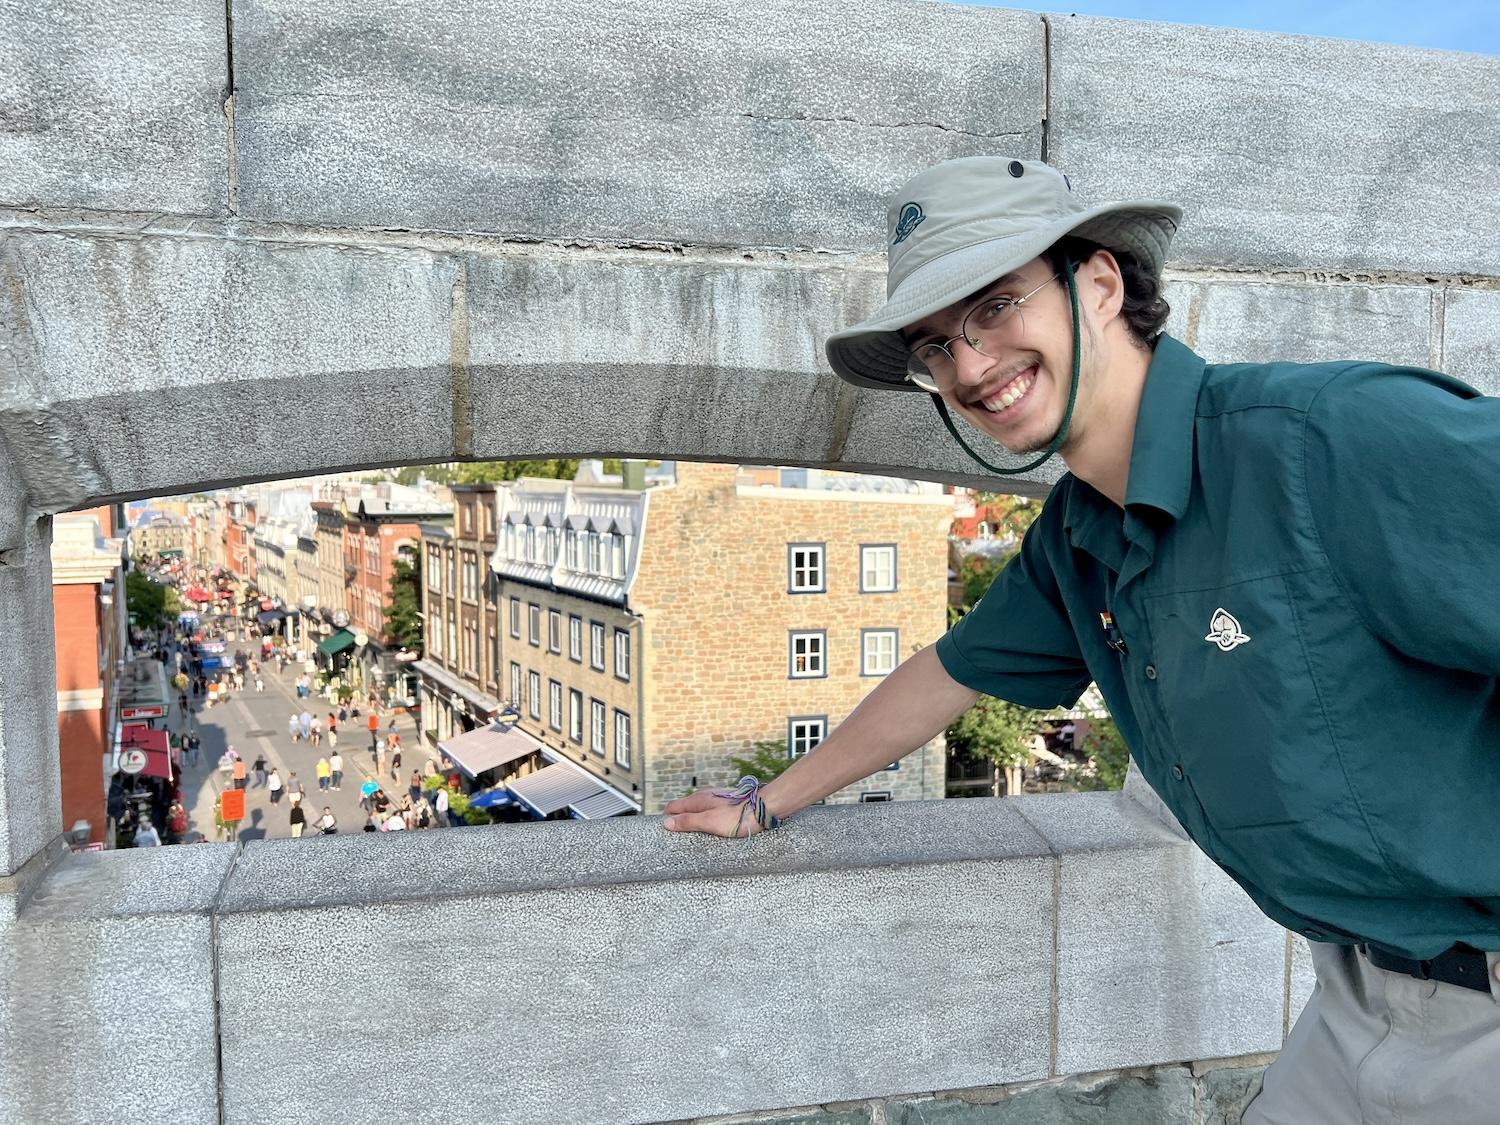 Parks Canada student guide Jacob Murray leads a walking tour of the Fortifications of Québec National Historic Site and shows a spot in Saint-Jean gate that overlooks a busy street.